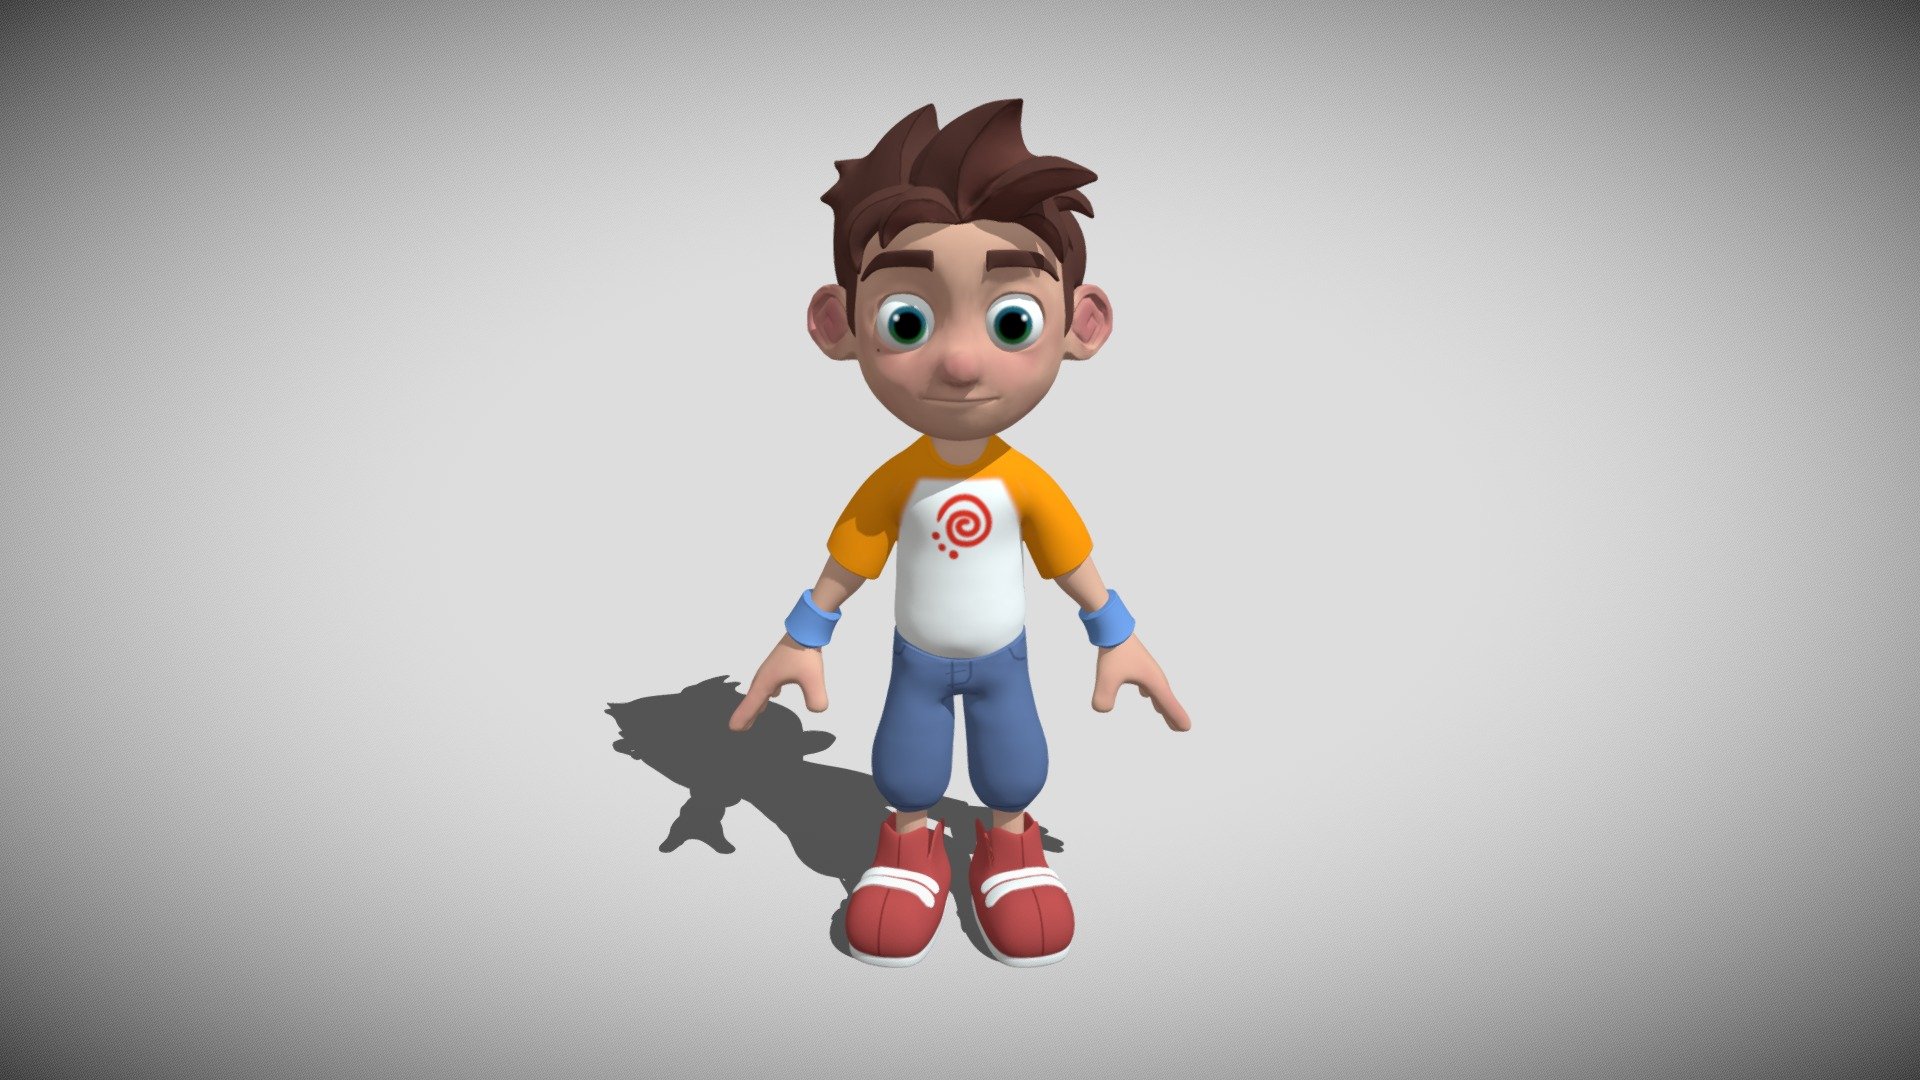 That Is My First Ever Model To Sell And Available At Decent Price I Have Everything You Want Thank You All - Cartoon Character - 3D model by Tariq Jamil (@tjamil873) 3d model